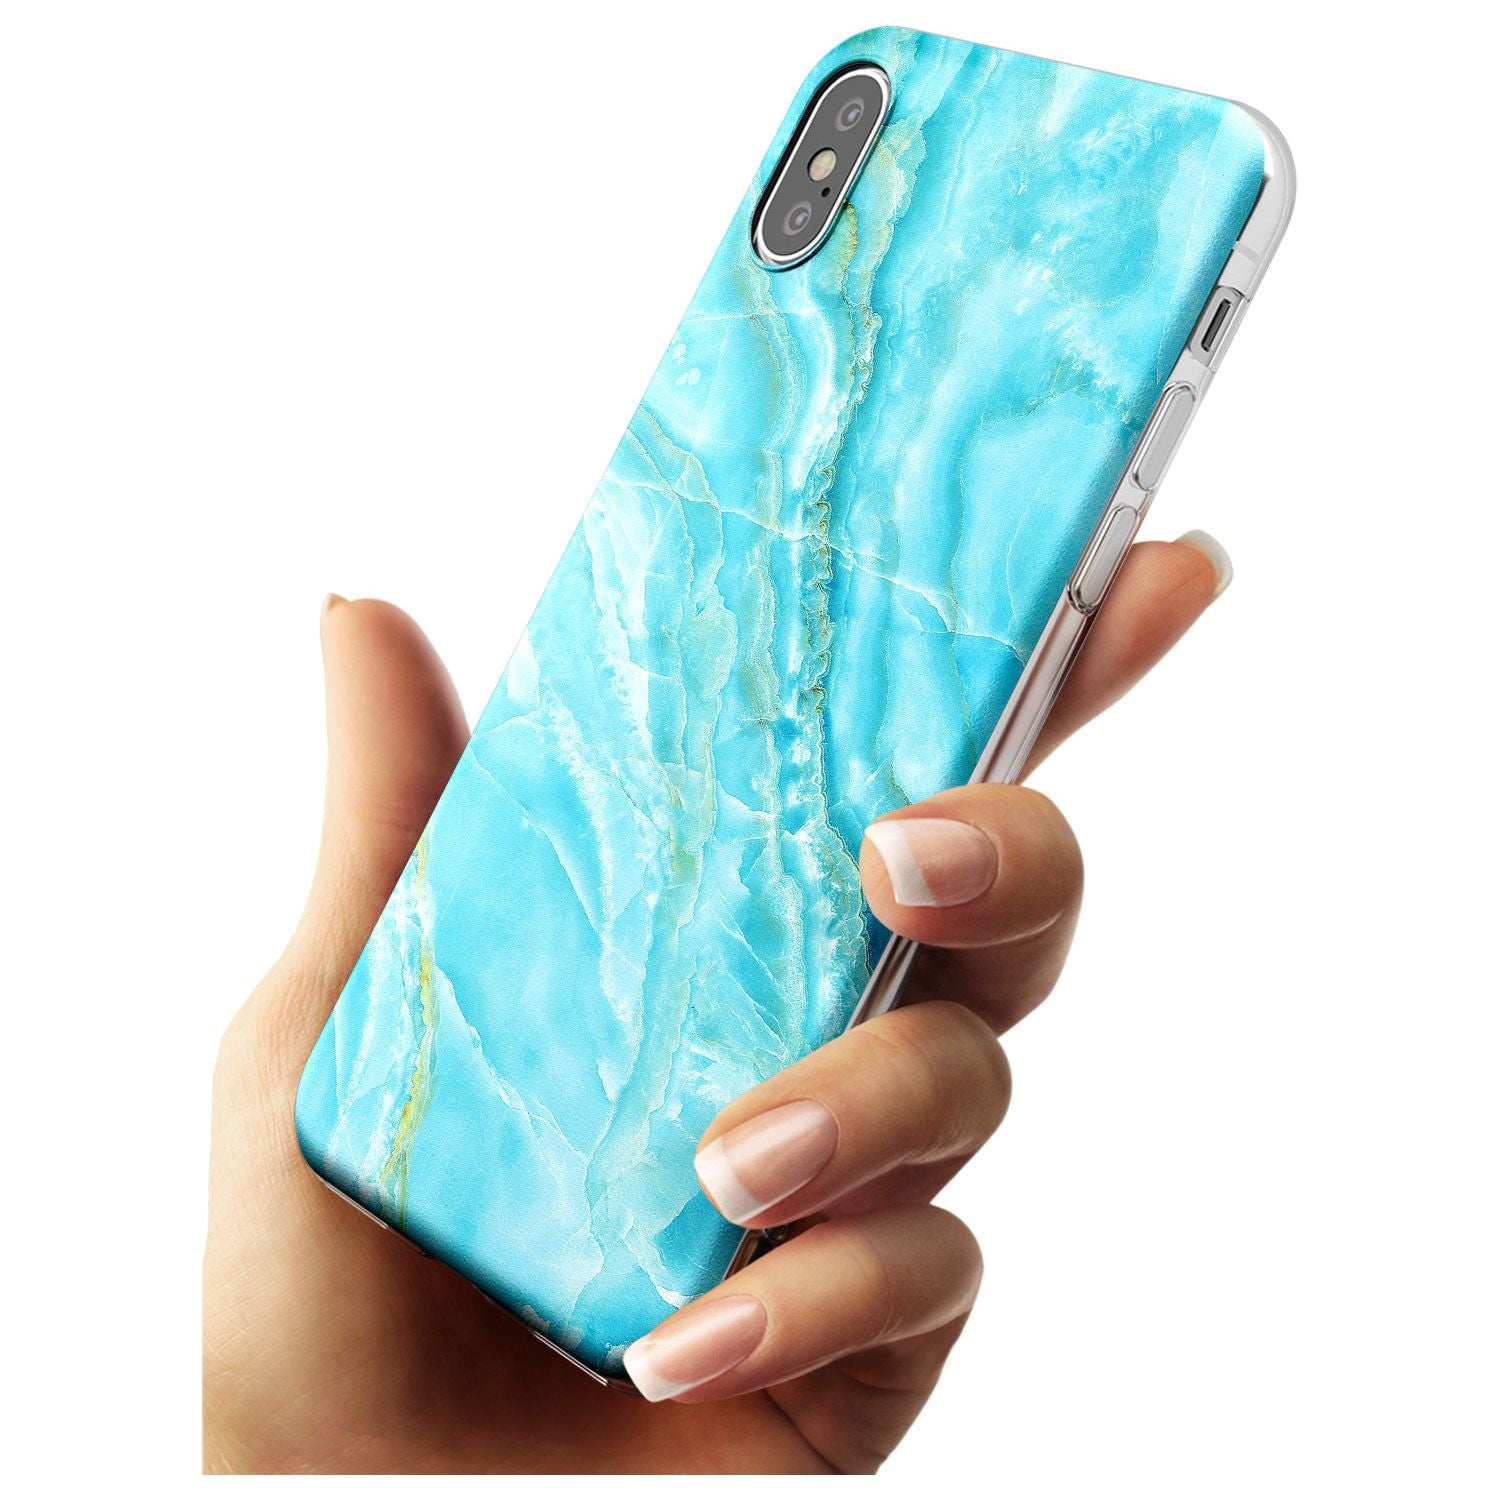 Bright Blue Onyx Marble Texture Black Impact Phone Case for iPhone X XS Max XR